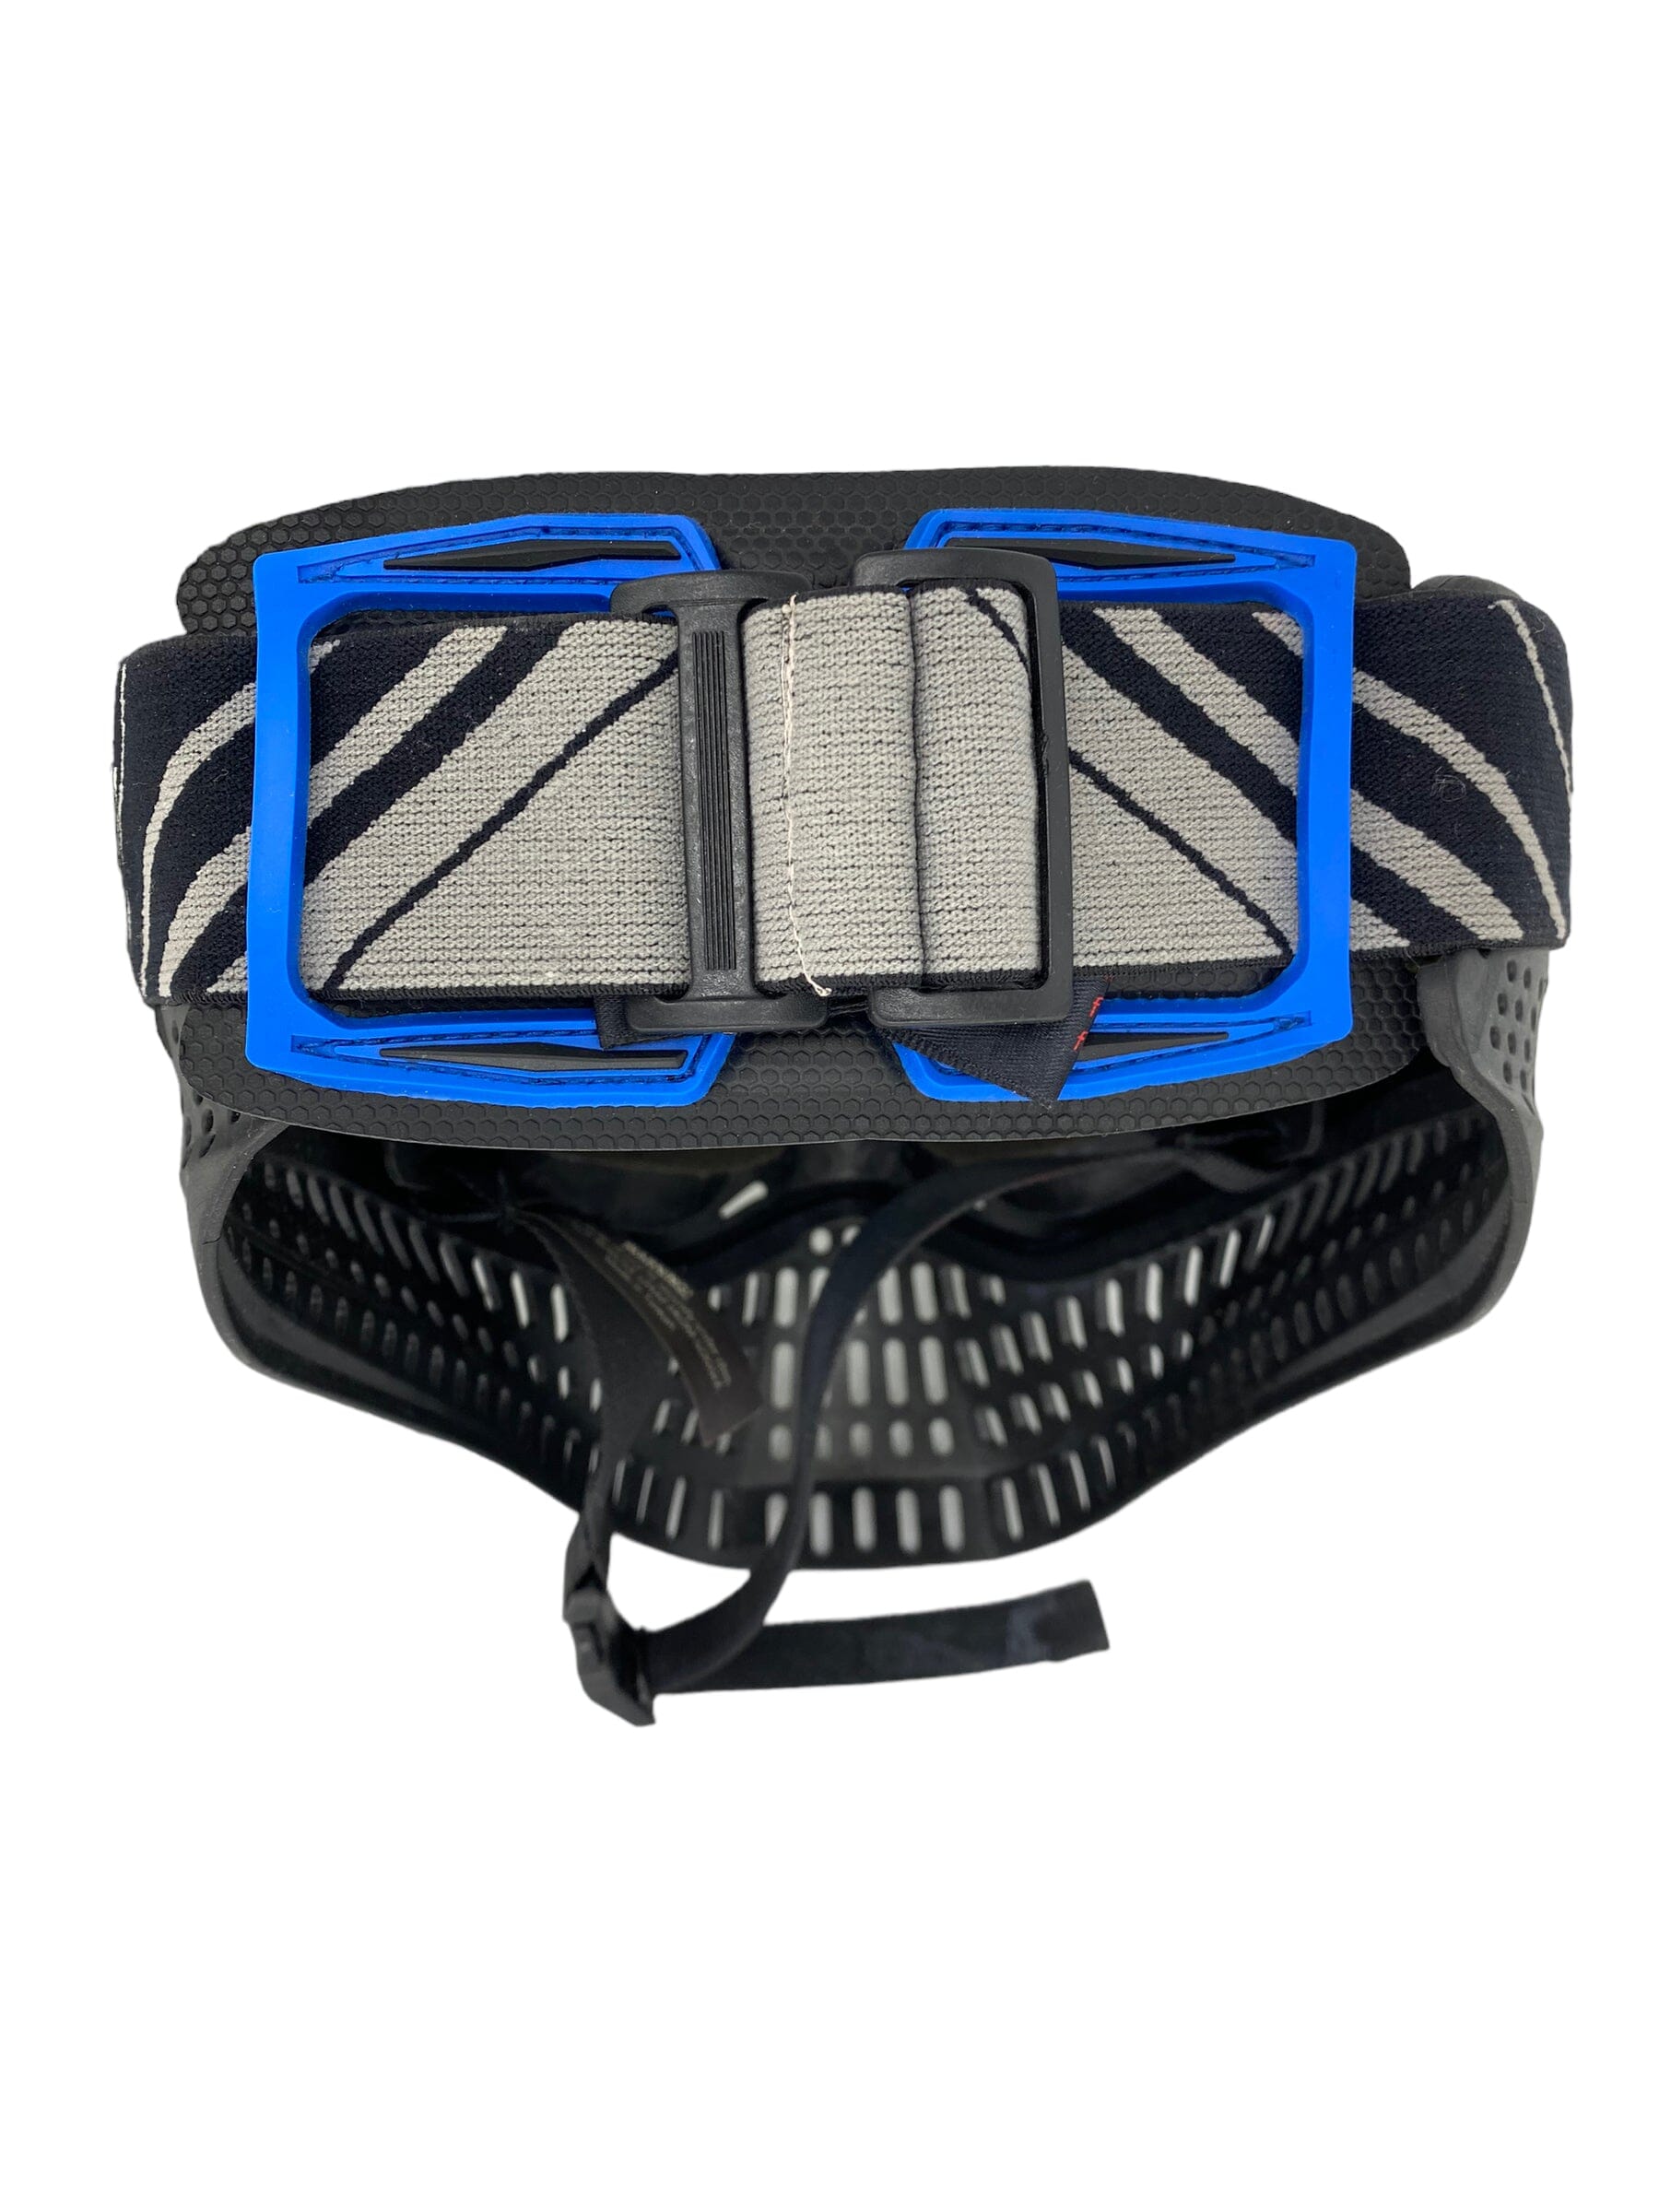 Used JT Pro-flex X Goggle Mask w/Mask Case Paintball Gun from CPXBrosPaintball Buy/Sell/Trade Paintball Markers, Paintball Hoppers, Paintball Masks, and Hormesis Headbands